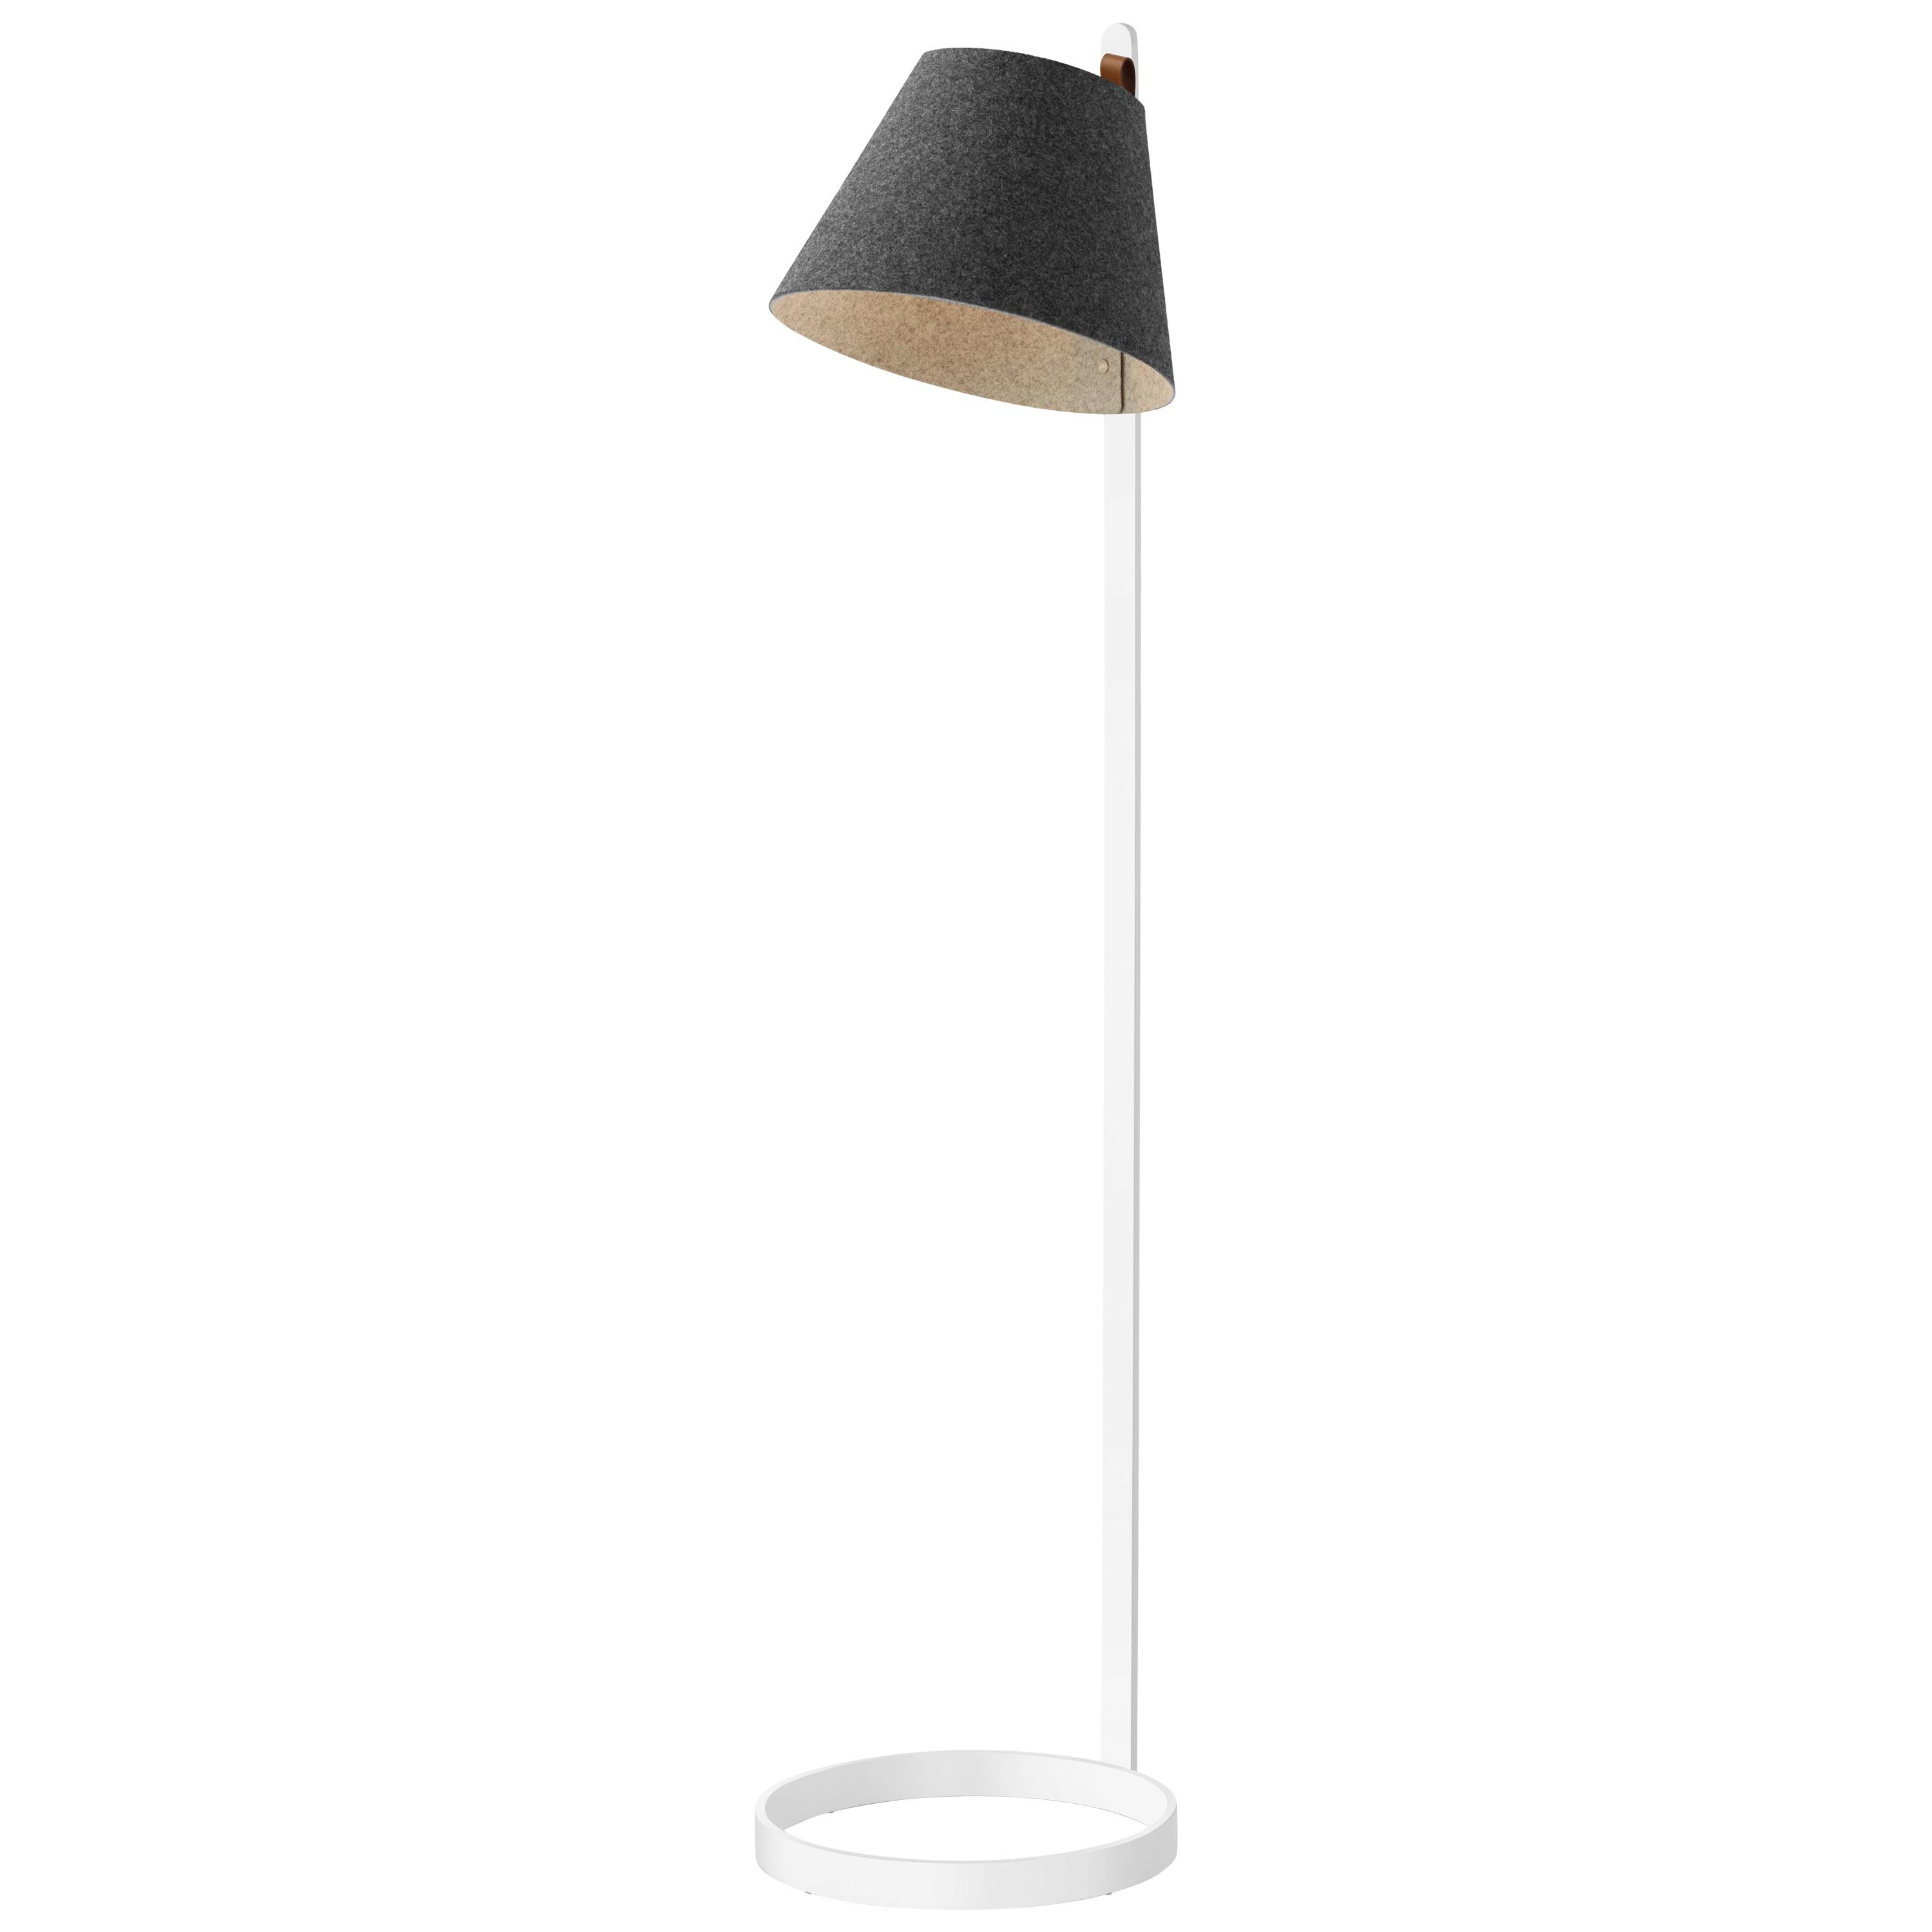 Lana Floor Lamp in Charcoal and Grey with White Base by Pablo Designs